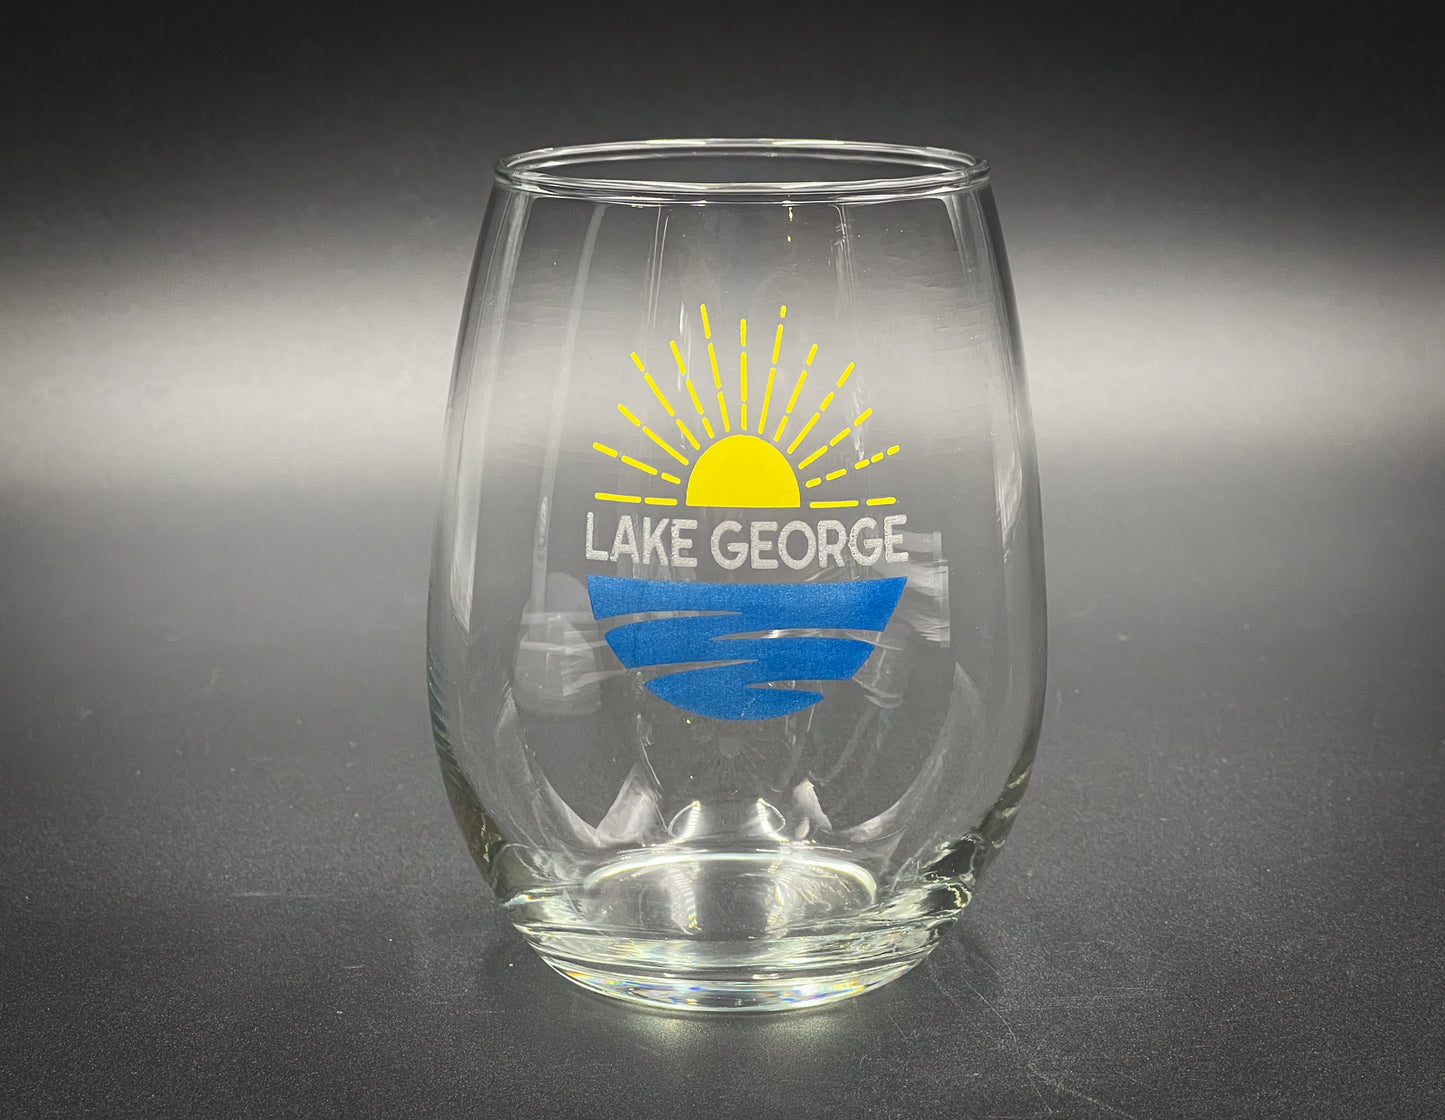 Lake George Sunny Days Engraved and Painted -  21 oz Stemless Wine Glass